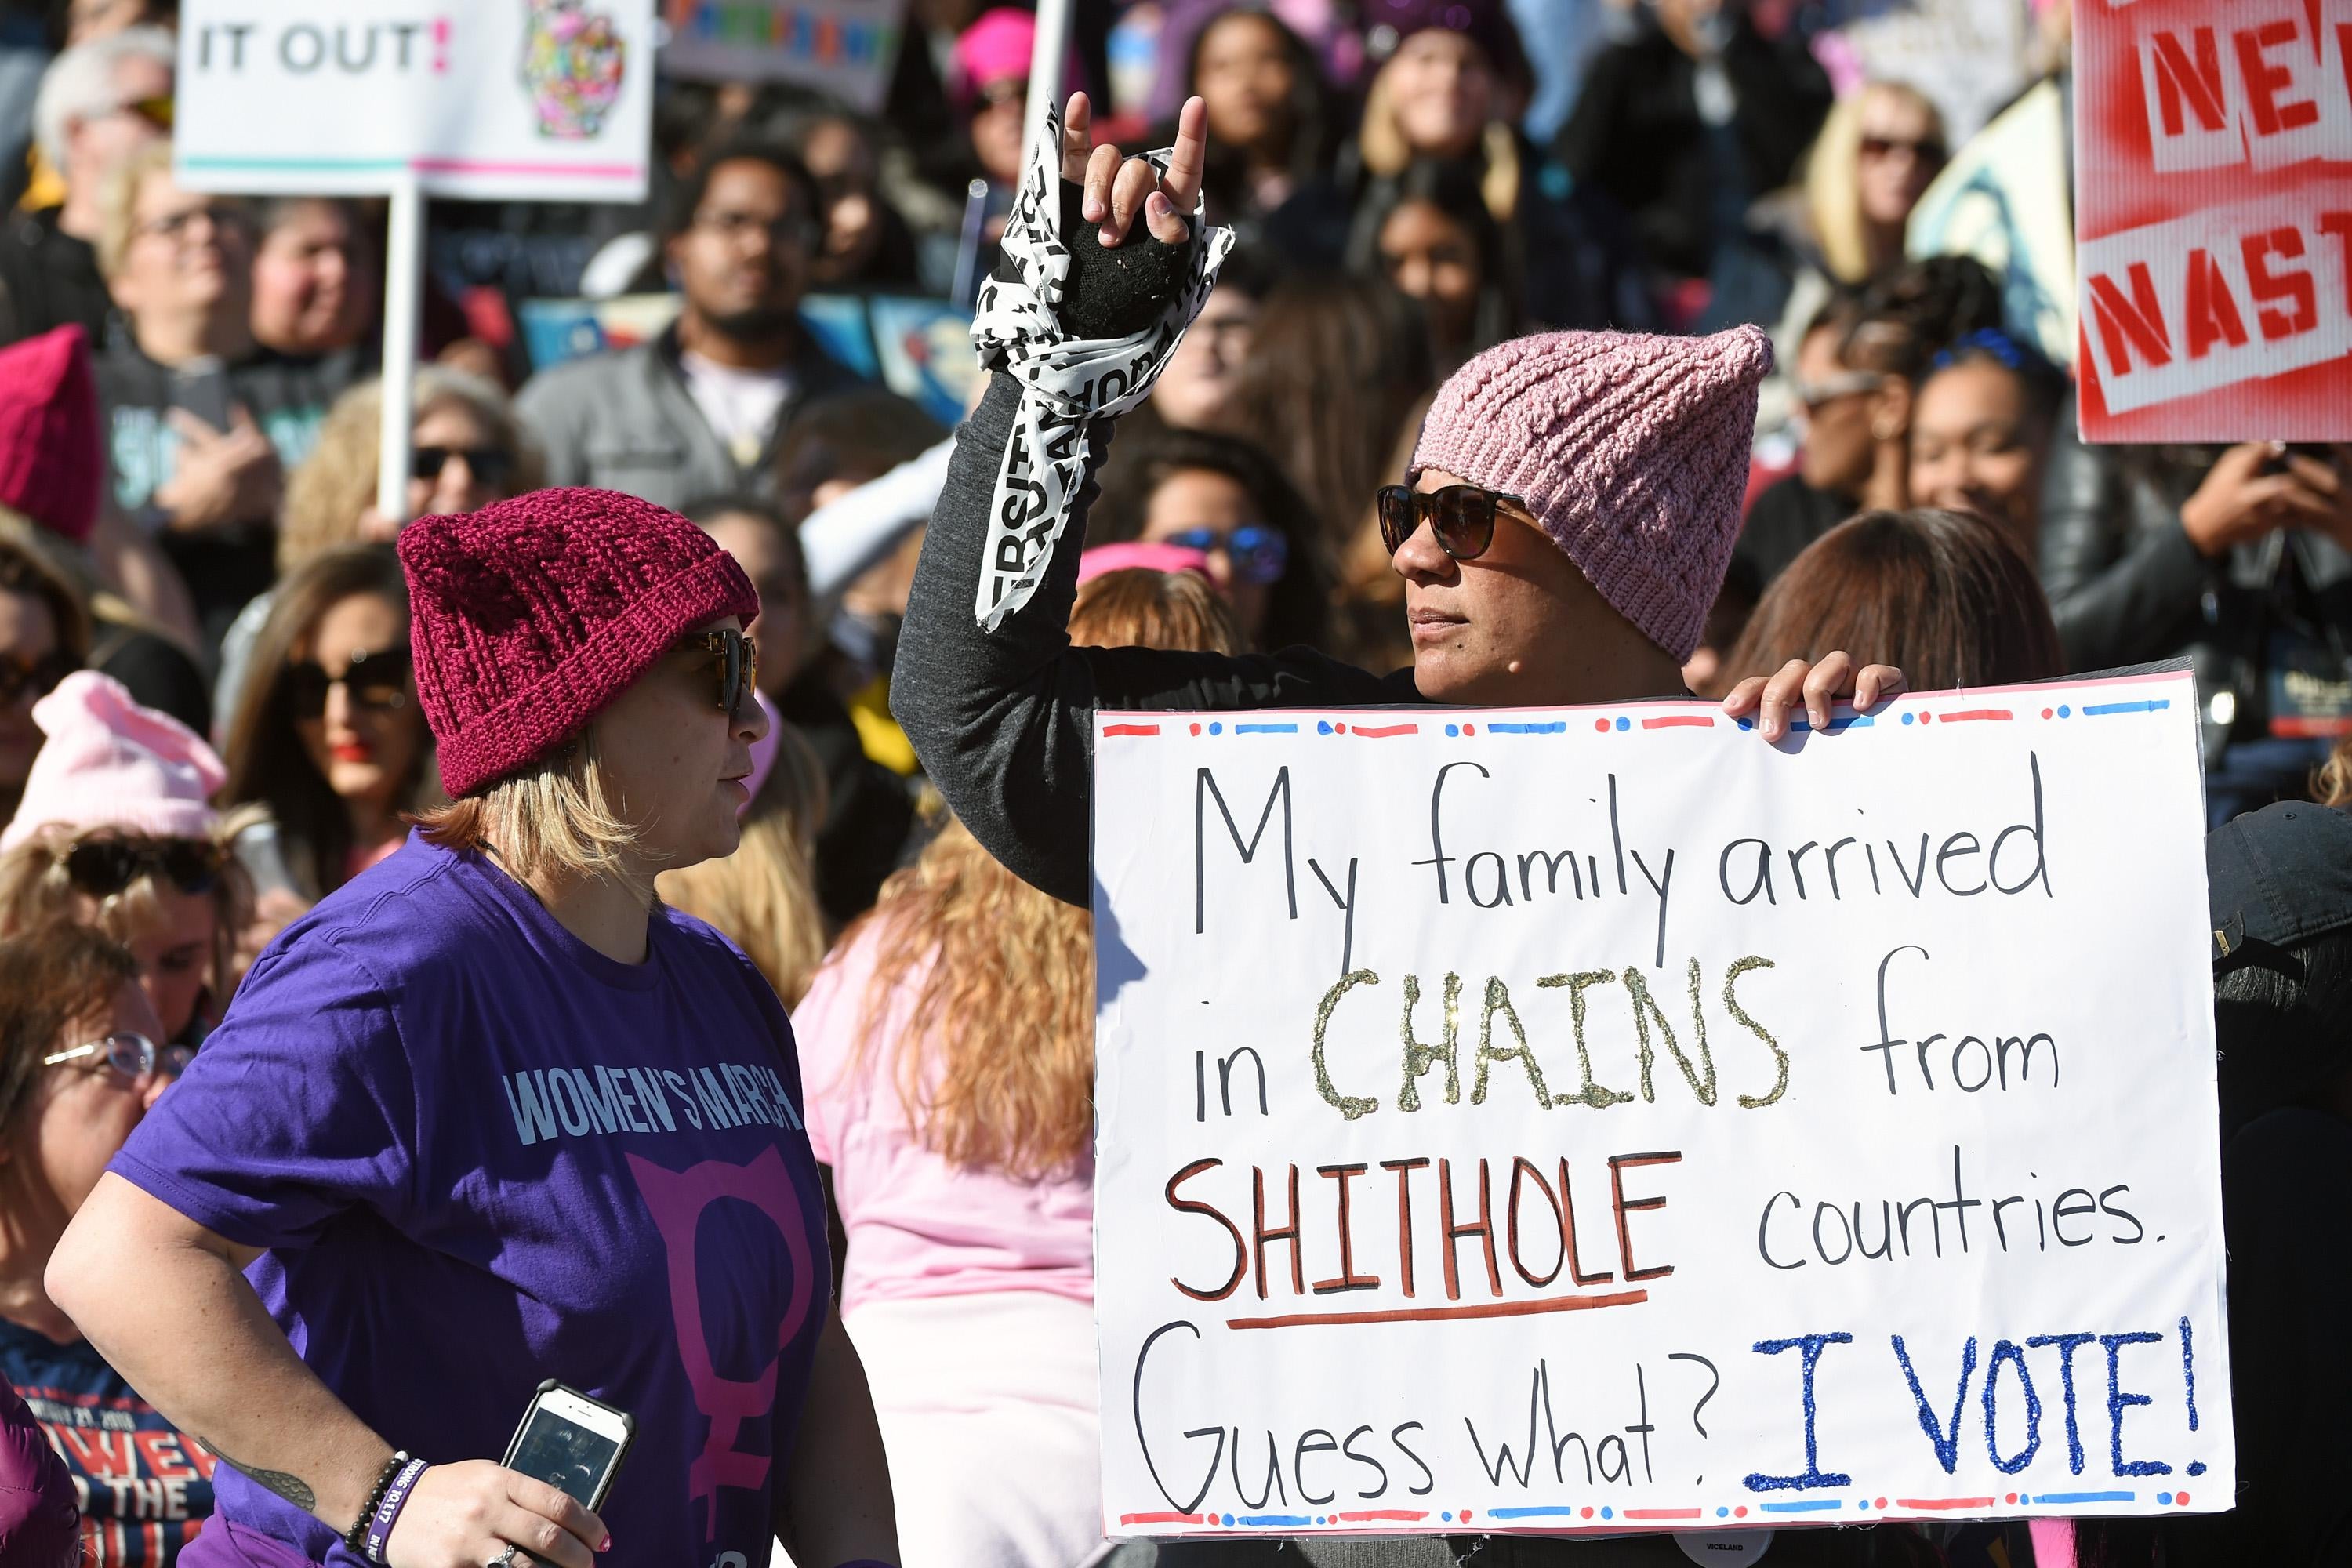 LAS VEGAS, NV - JANUARY 21:  (EDITOR'S NOTE: Image contains profanity.) An attendee holds a sign during the Women's March 'Power to the Polls' voter registration tour launch at Sam Boyd Stadium on January 21, 2018 in Las Vegas, Nevada. Demonstrators across the nation gathered over the weekend, one year after the historic Women's March on Washington, D.C., to protest President Donald Trump's administration and to raise awareness for women's issues.  (Photo by Ethan Miller/Getty Images)